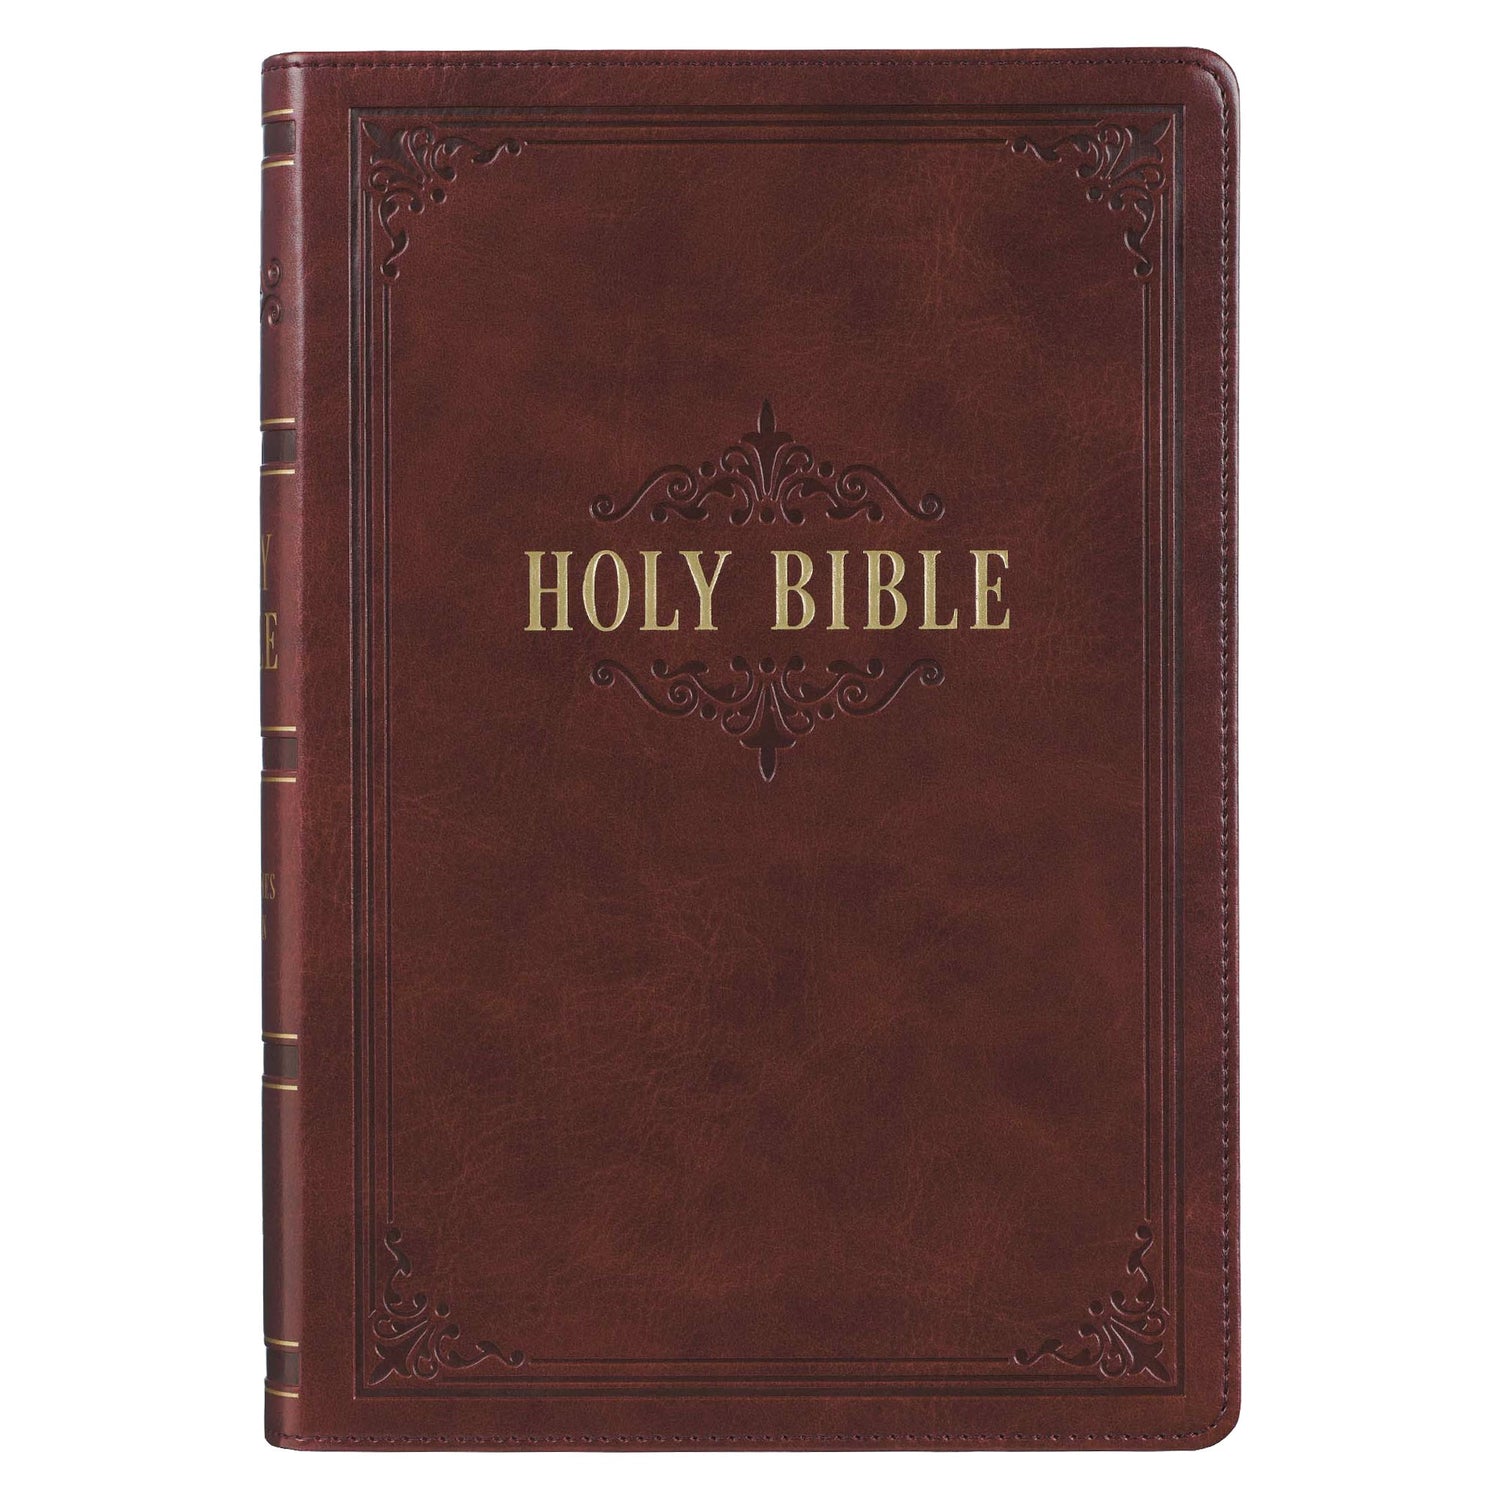 Seed of Abraham Christian Bookstore - (In)Courage - KJV Giant Print Full Size Bible-Burgundy LuxLeather Indexed